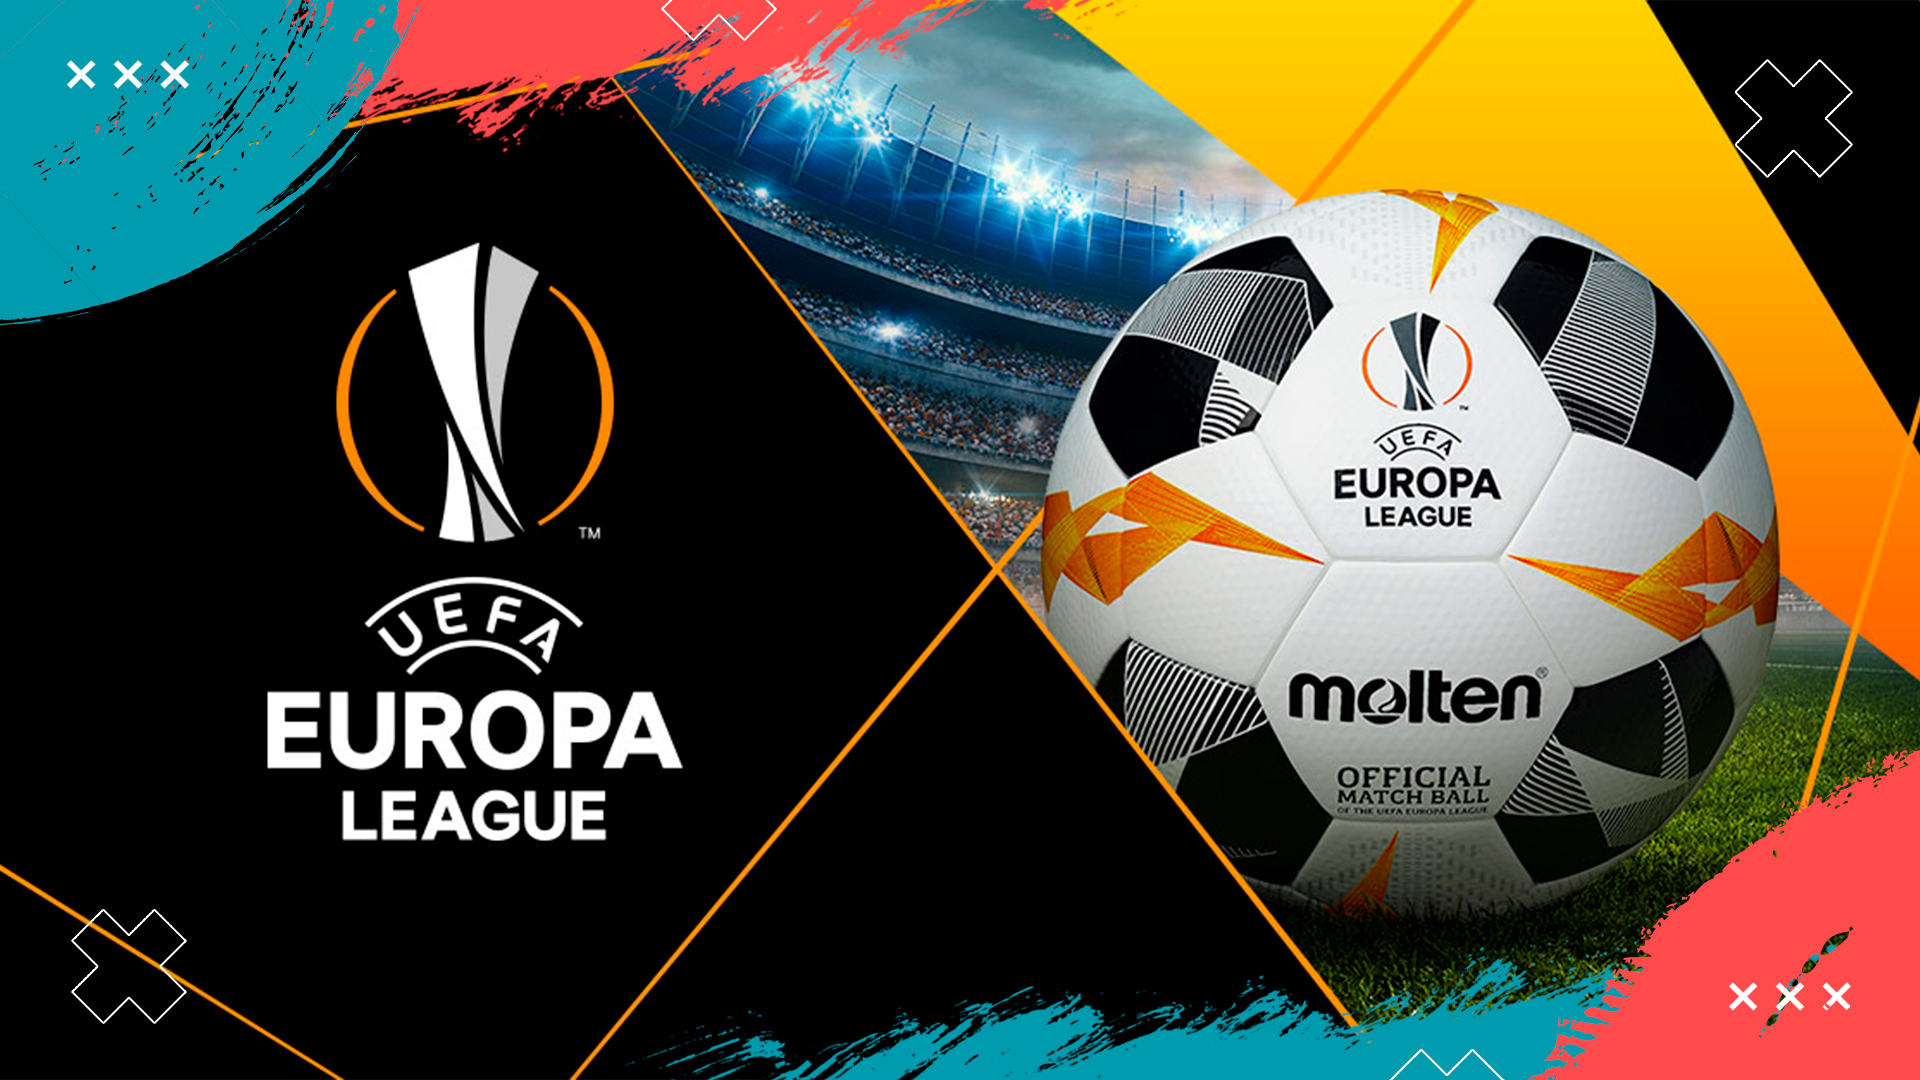 Upcoming matches of the UEFA Europa League